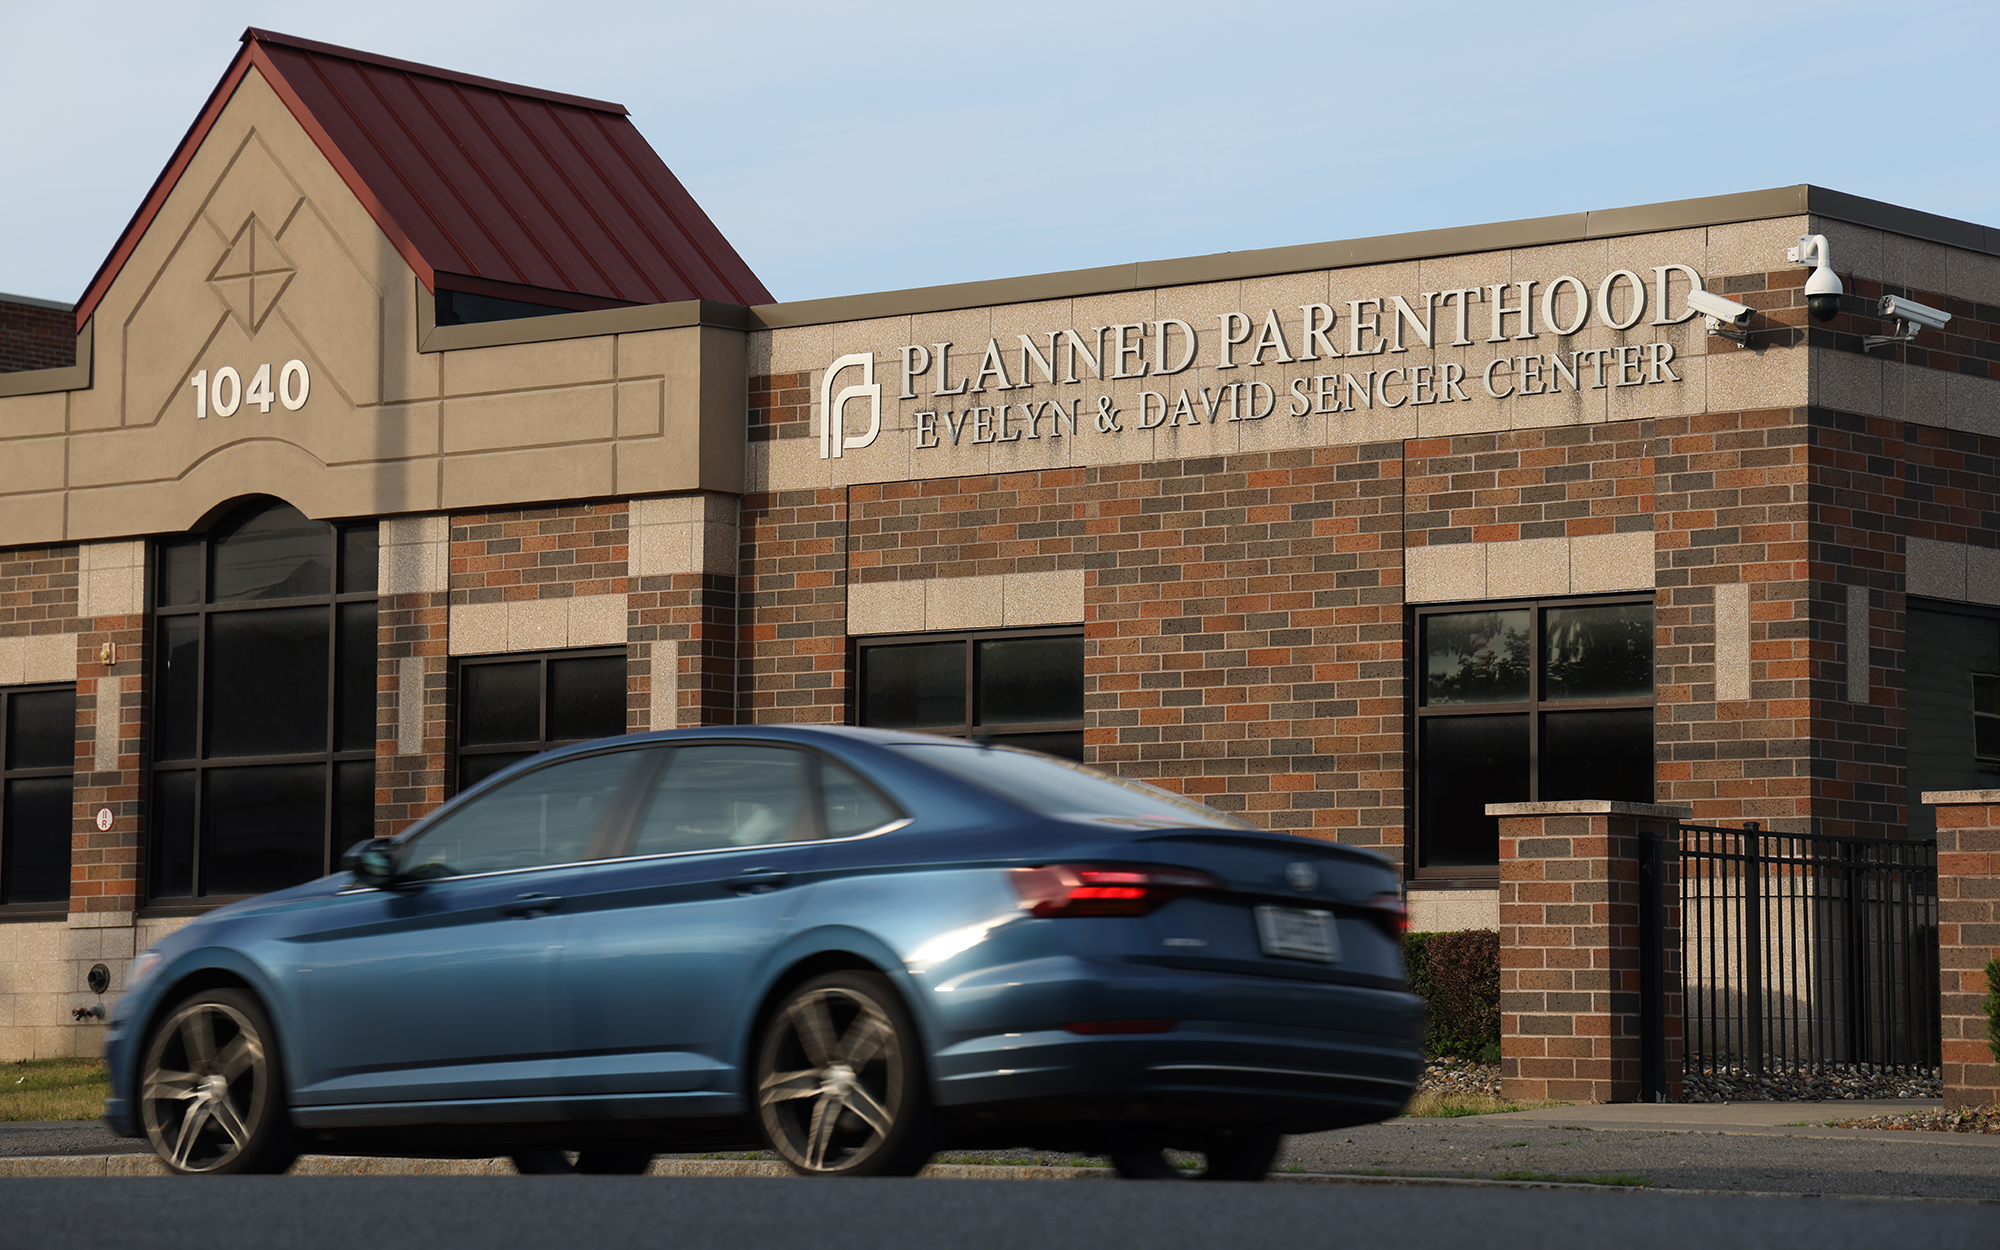 Some health experts argue that abortion and other services prohibited at Catholic-run hospitals can be obtained via local Planned Parenthood clinics, like this one seen in Schenectady, N.Y., on June 18, 2023. But clinic officials say wait times are already too long. (Photo by Morgan Casey/News21)